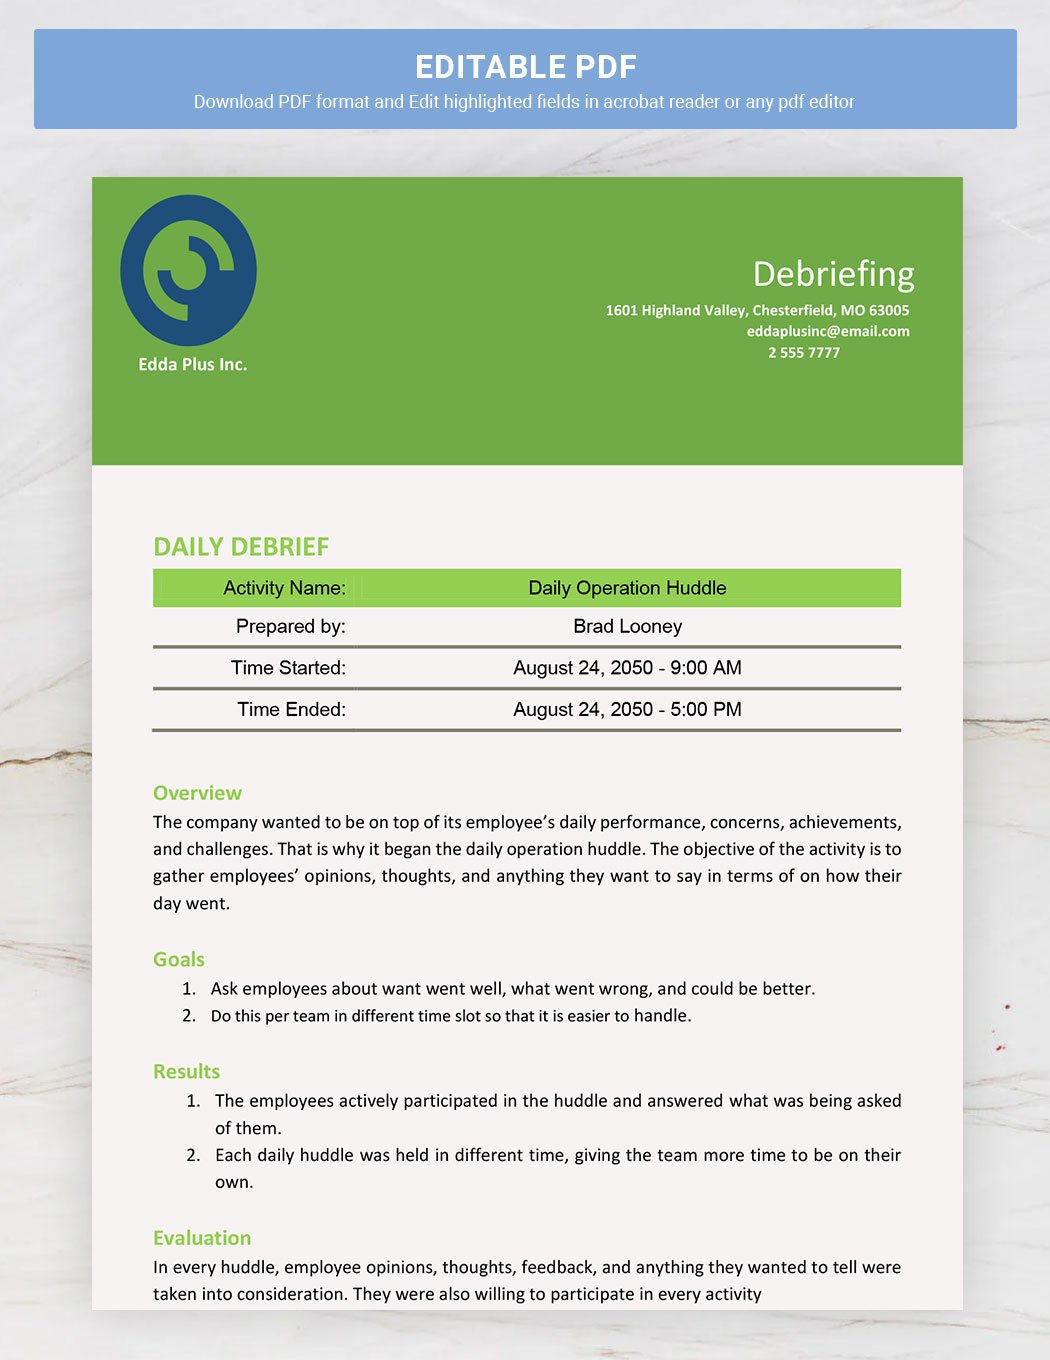 Daily Debrief Template